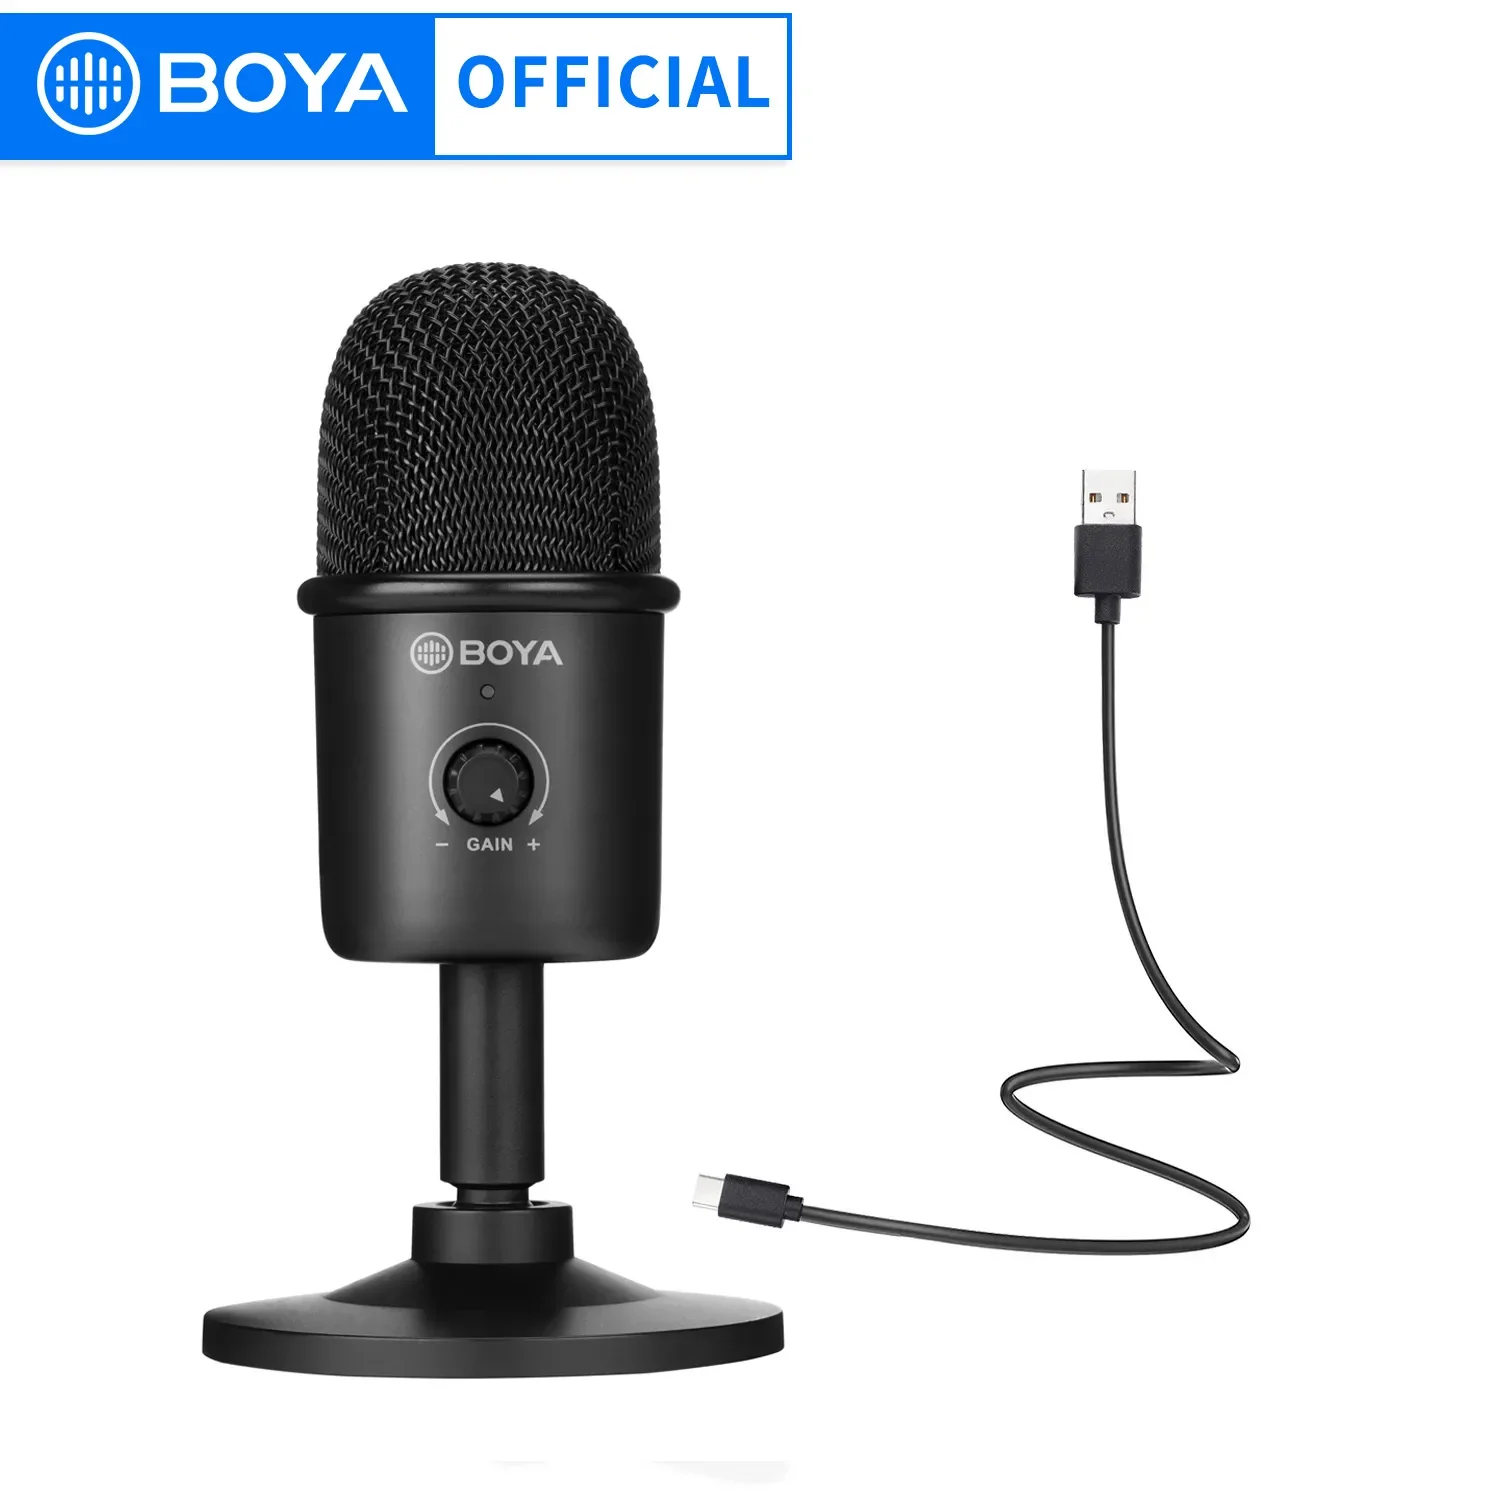 

BOYA BY-CM3 USB Condenser Desktop Microphone With Recording for Laptop Windows Mac Studio Video Mode for Youtube Live Streaming